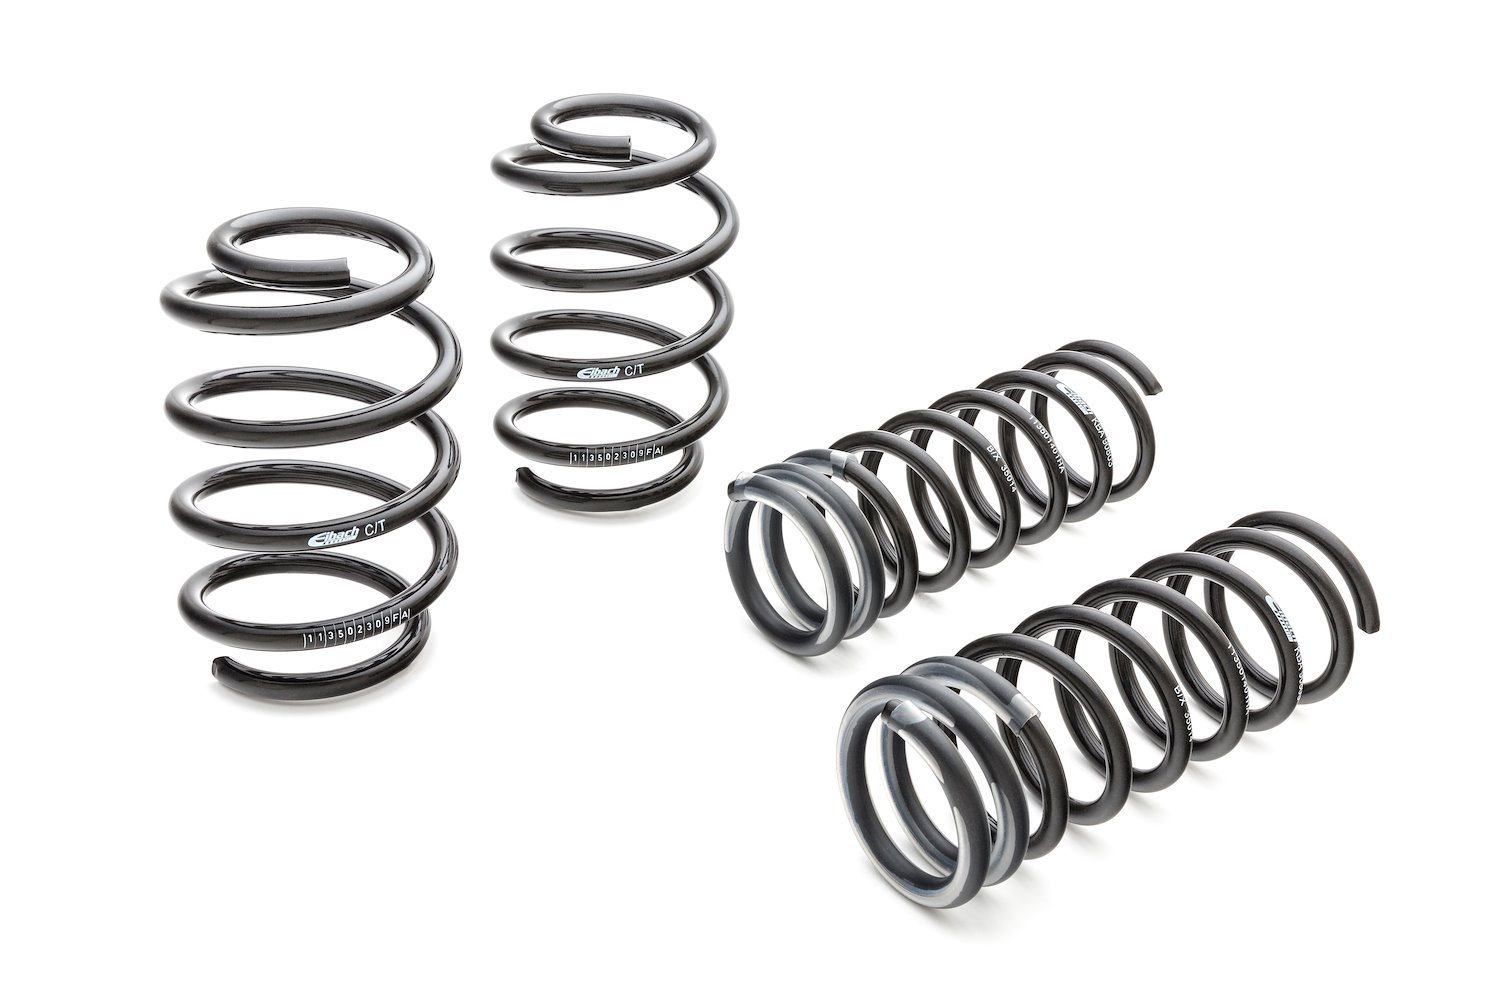 3590.140 Pro-Kit Lowering Springs 1999-2001 Mustang SVT Cobra Coupe - 1.400 in. Front/Rear Drop